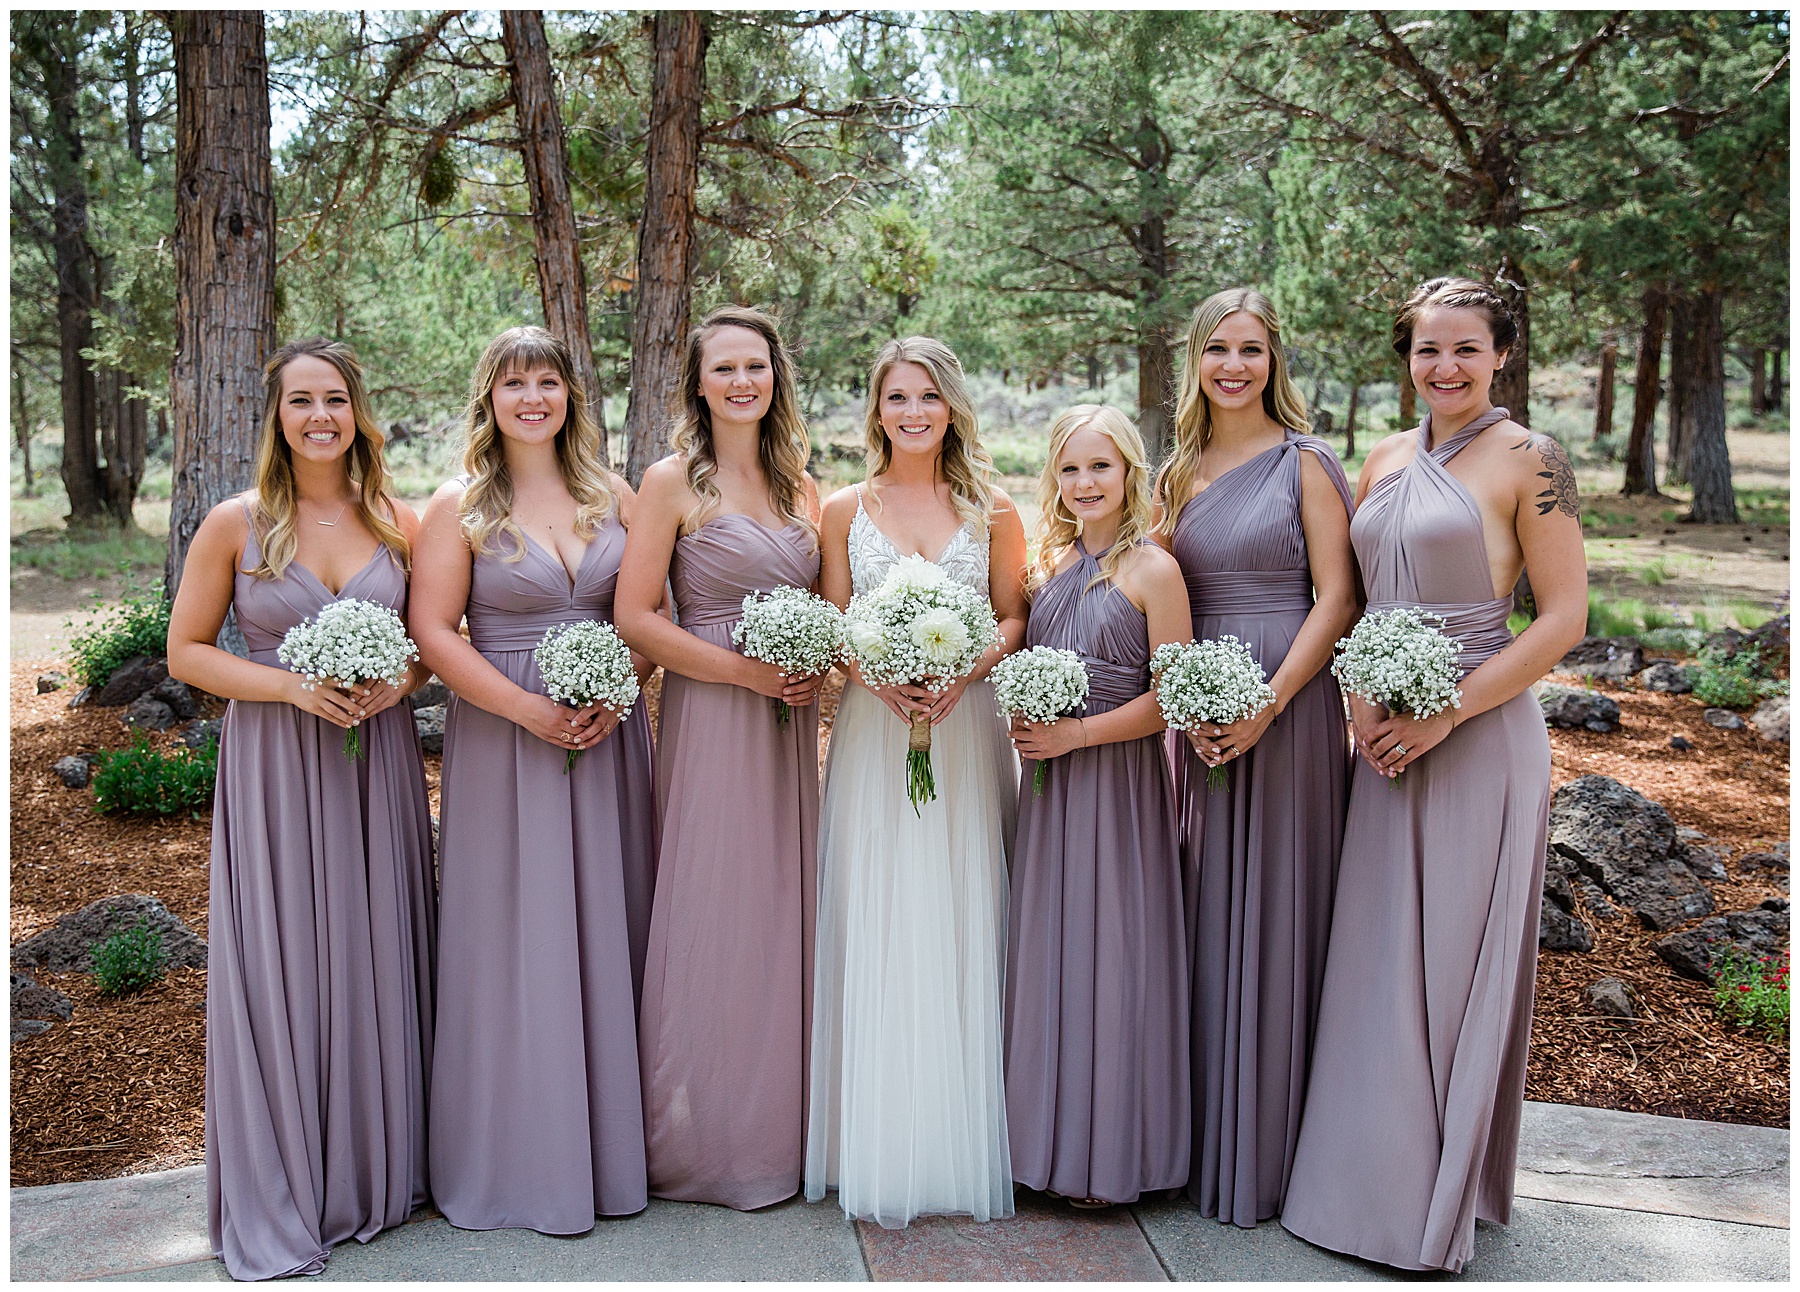 McKenna with bridesmaids on either side wearing different shades of lavender dresses in different styles.